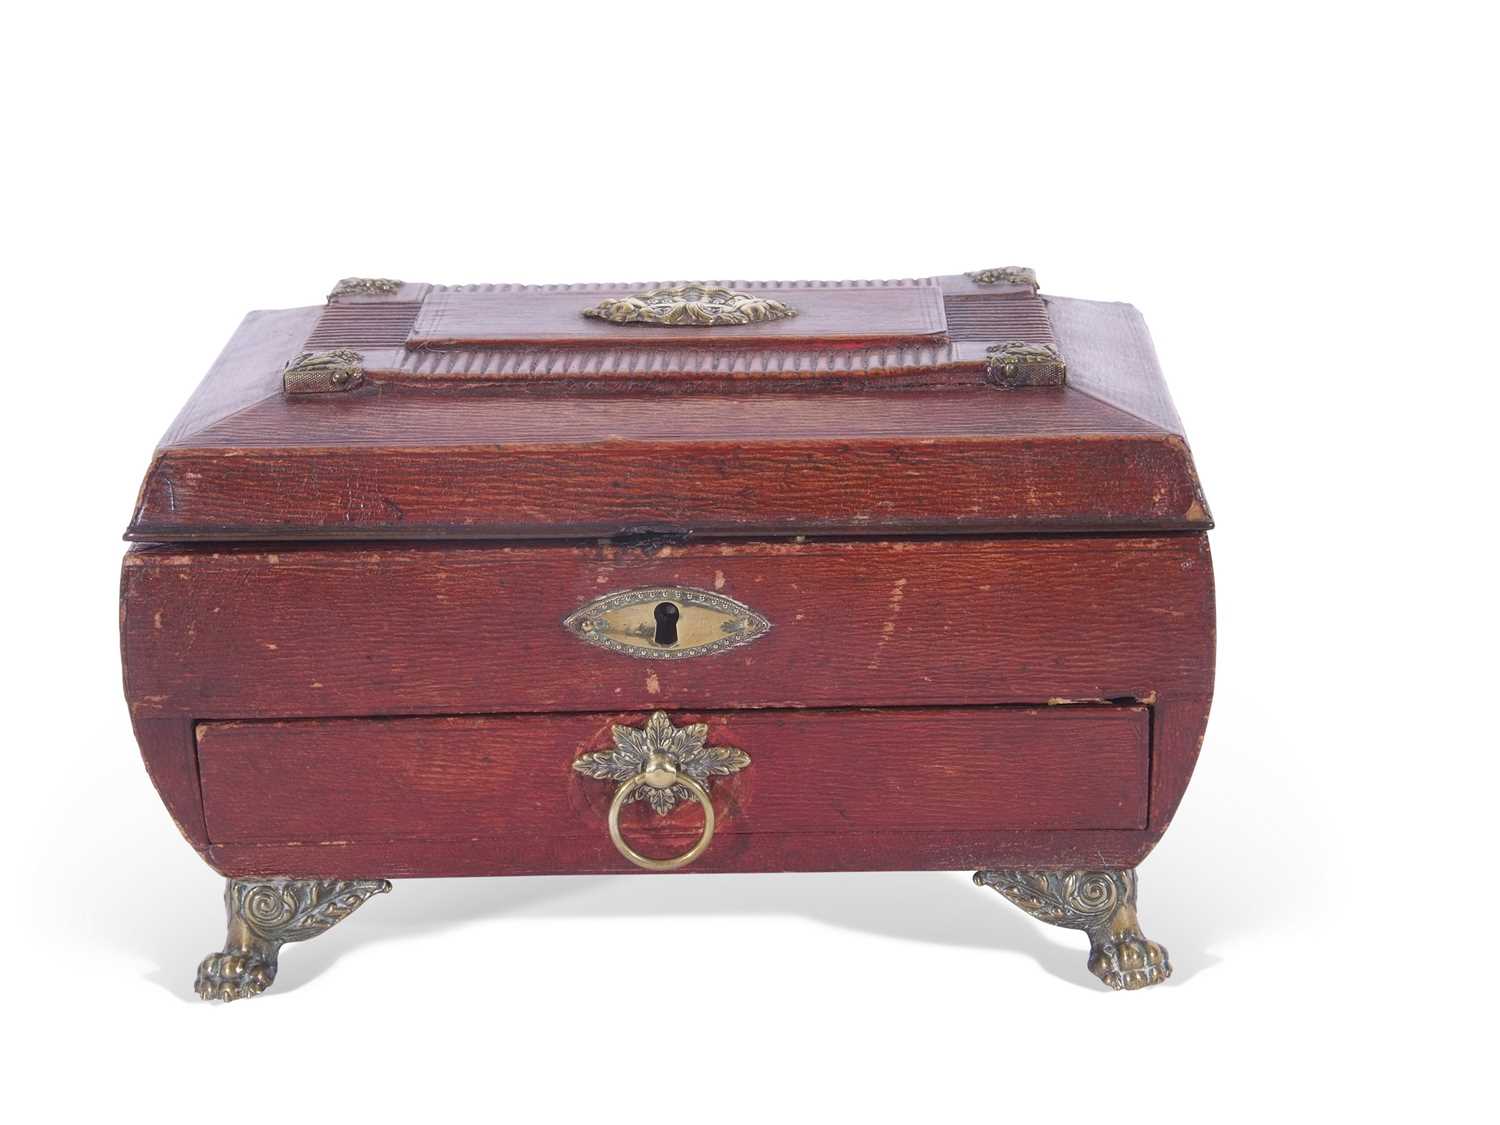 Regency red leather and brass embossed jewel box, hinged lid with silk lined interior, single drawer